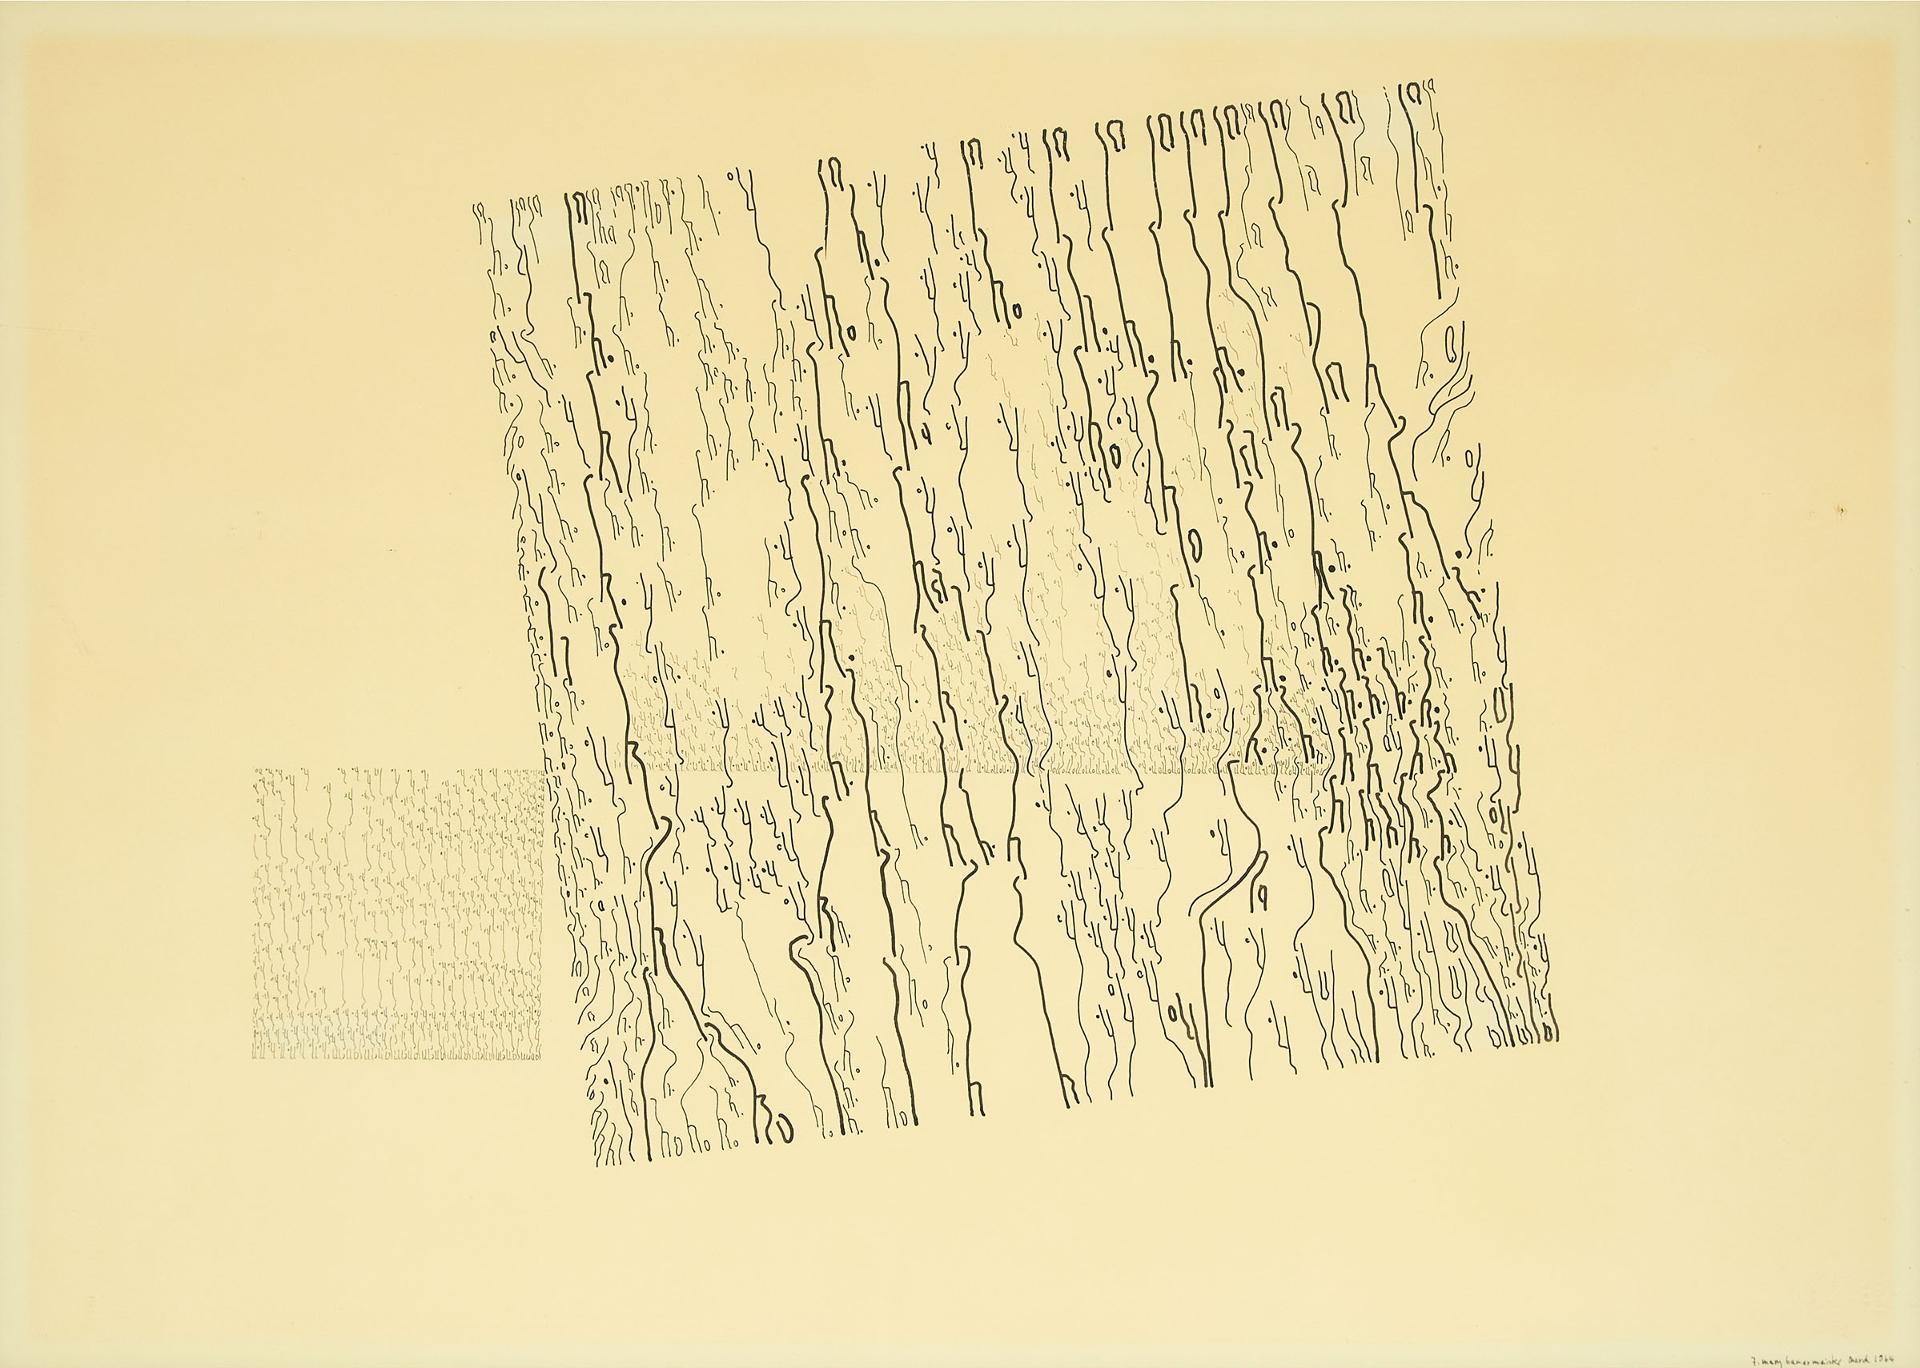 Mary Bauermeister - Untitled, 1964